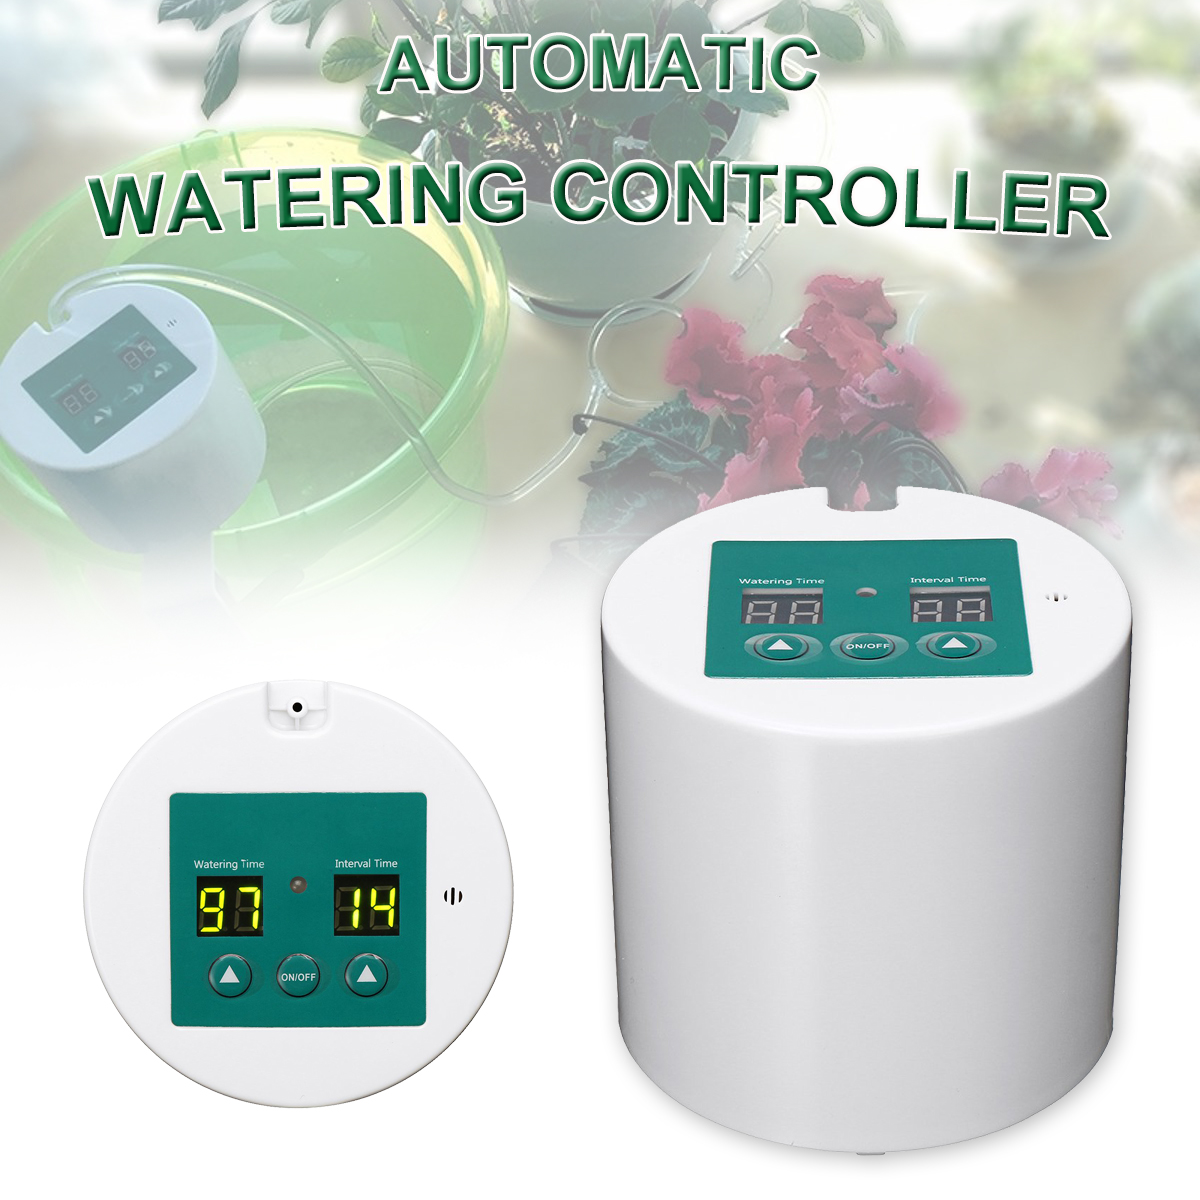 Intelligent-Garden-Automatic-Watering-Controller-Timer-System-Irrigation-Tool-1656439